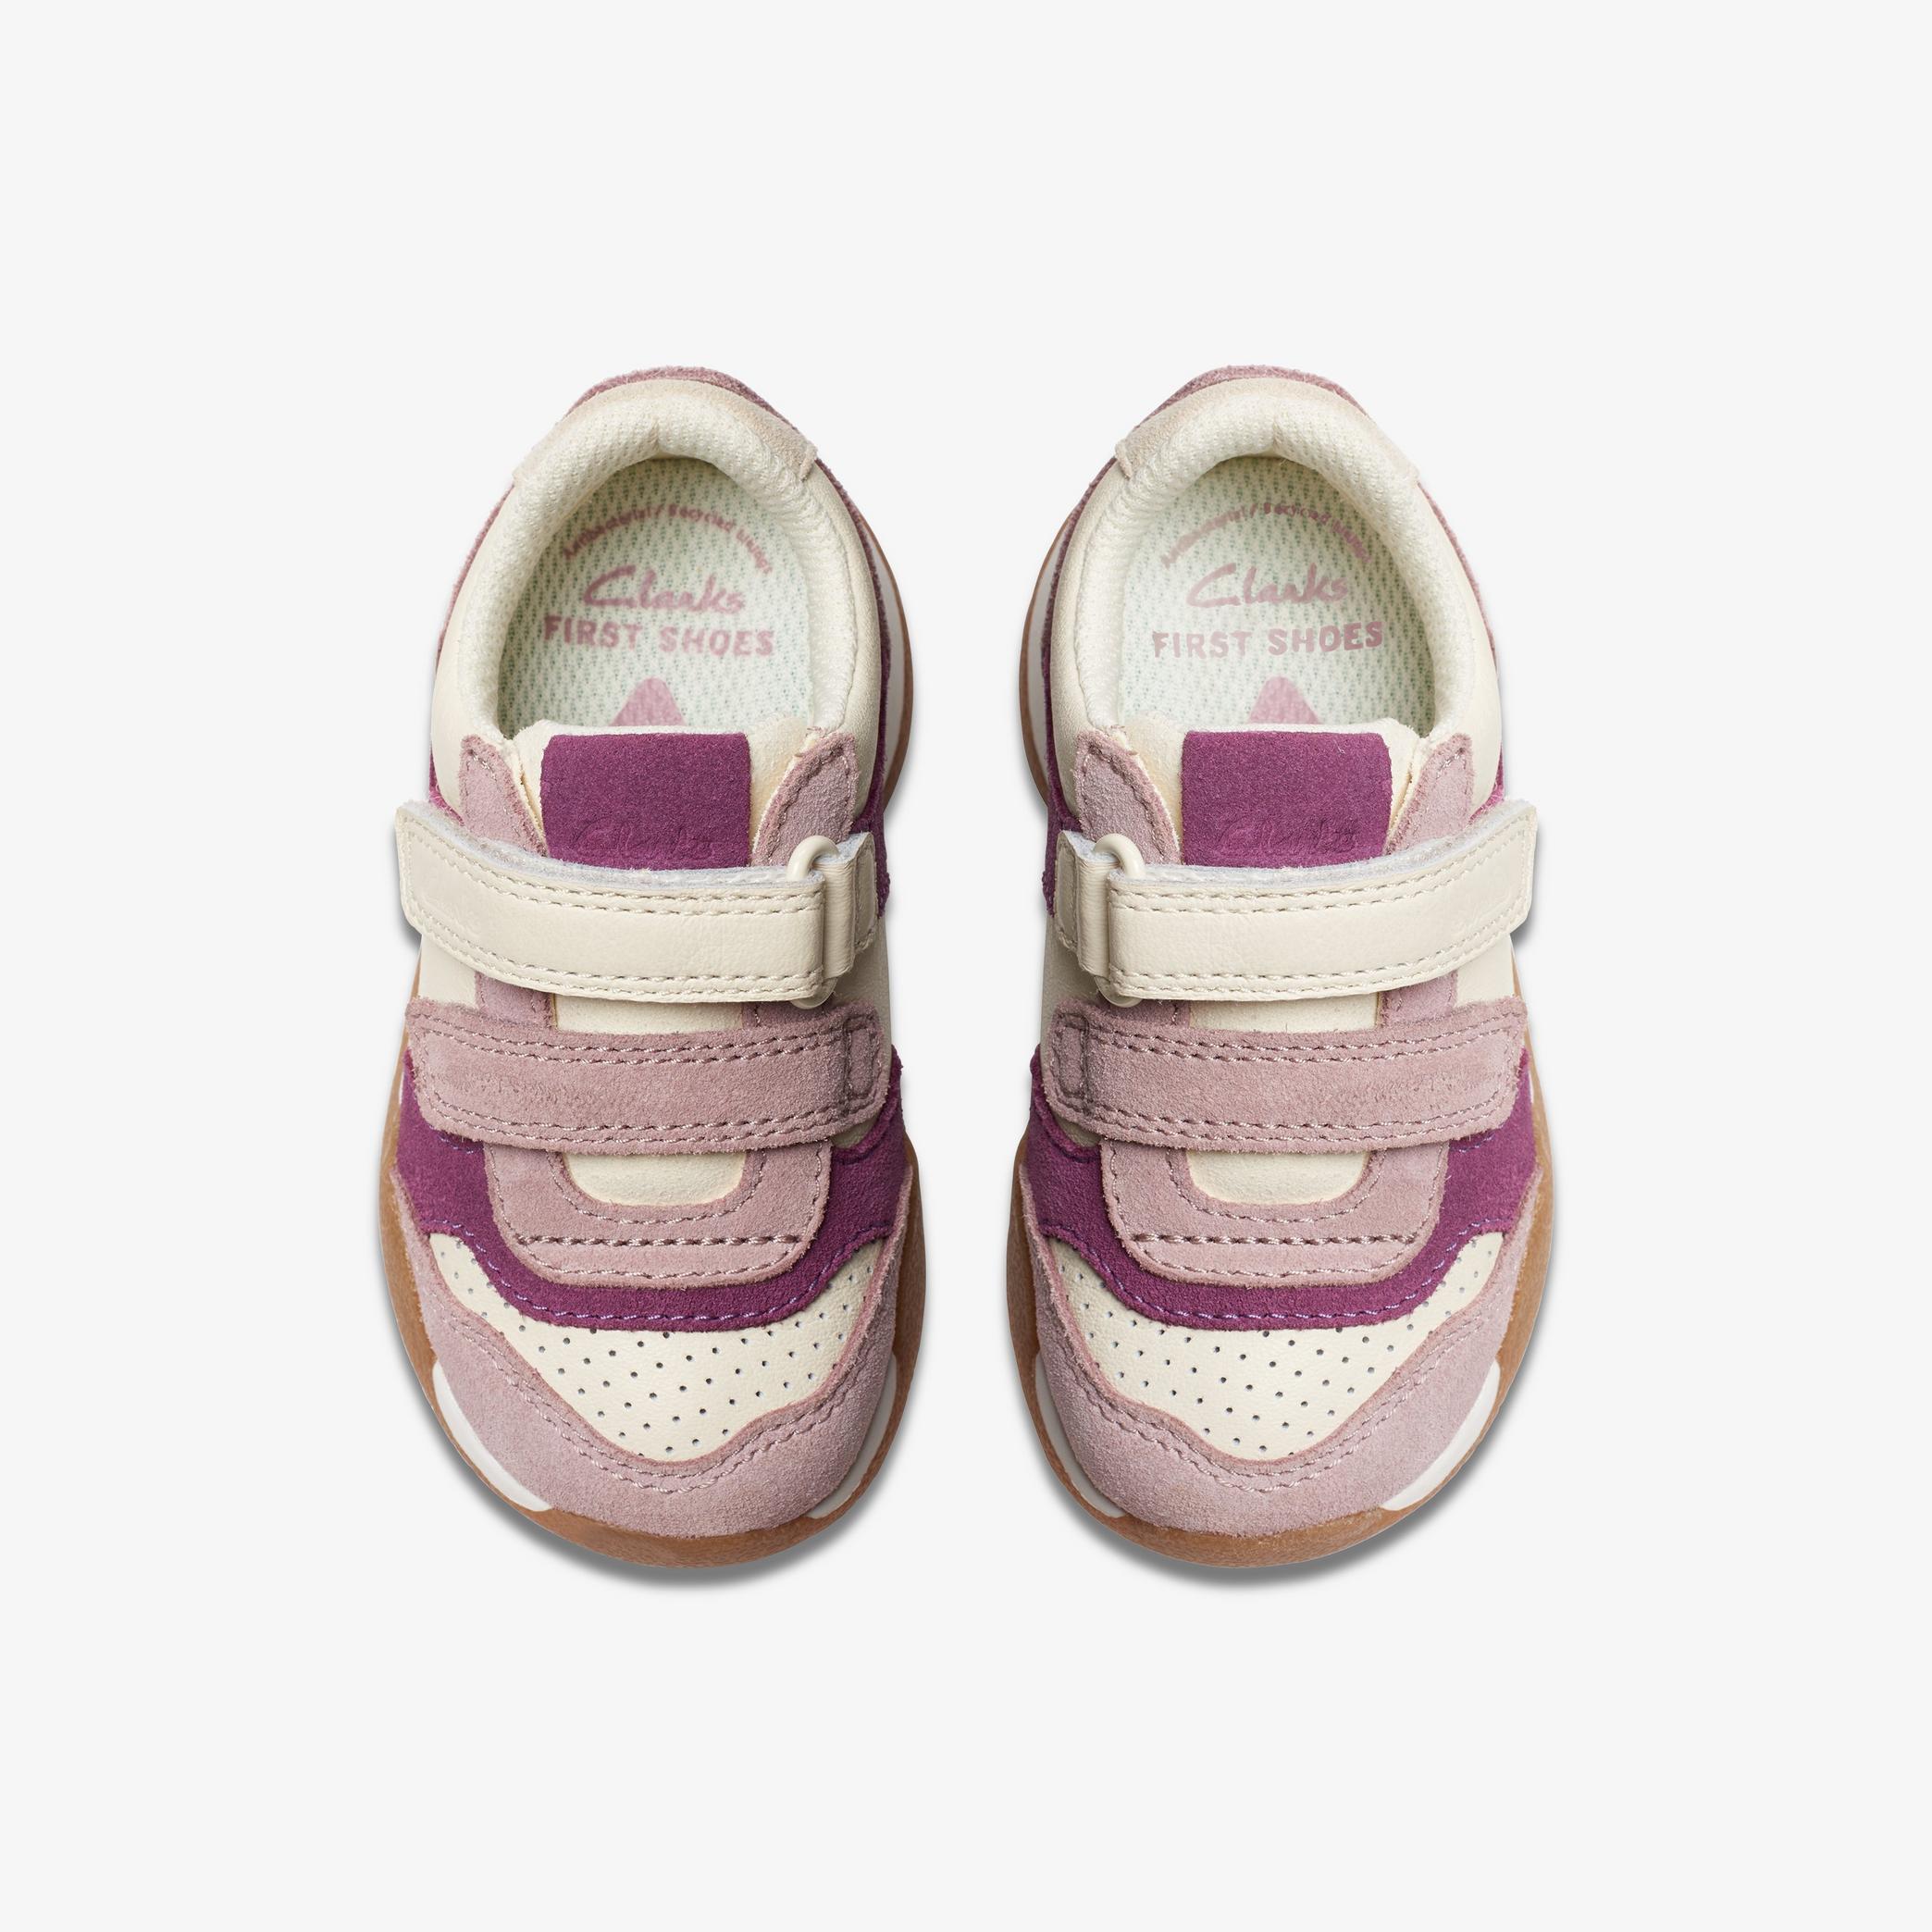 Girls Race Hero Toddler Dusty Pink Combination Shoes | Clarks UK